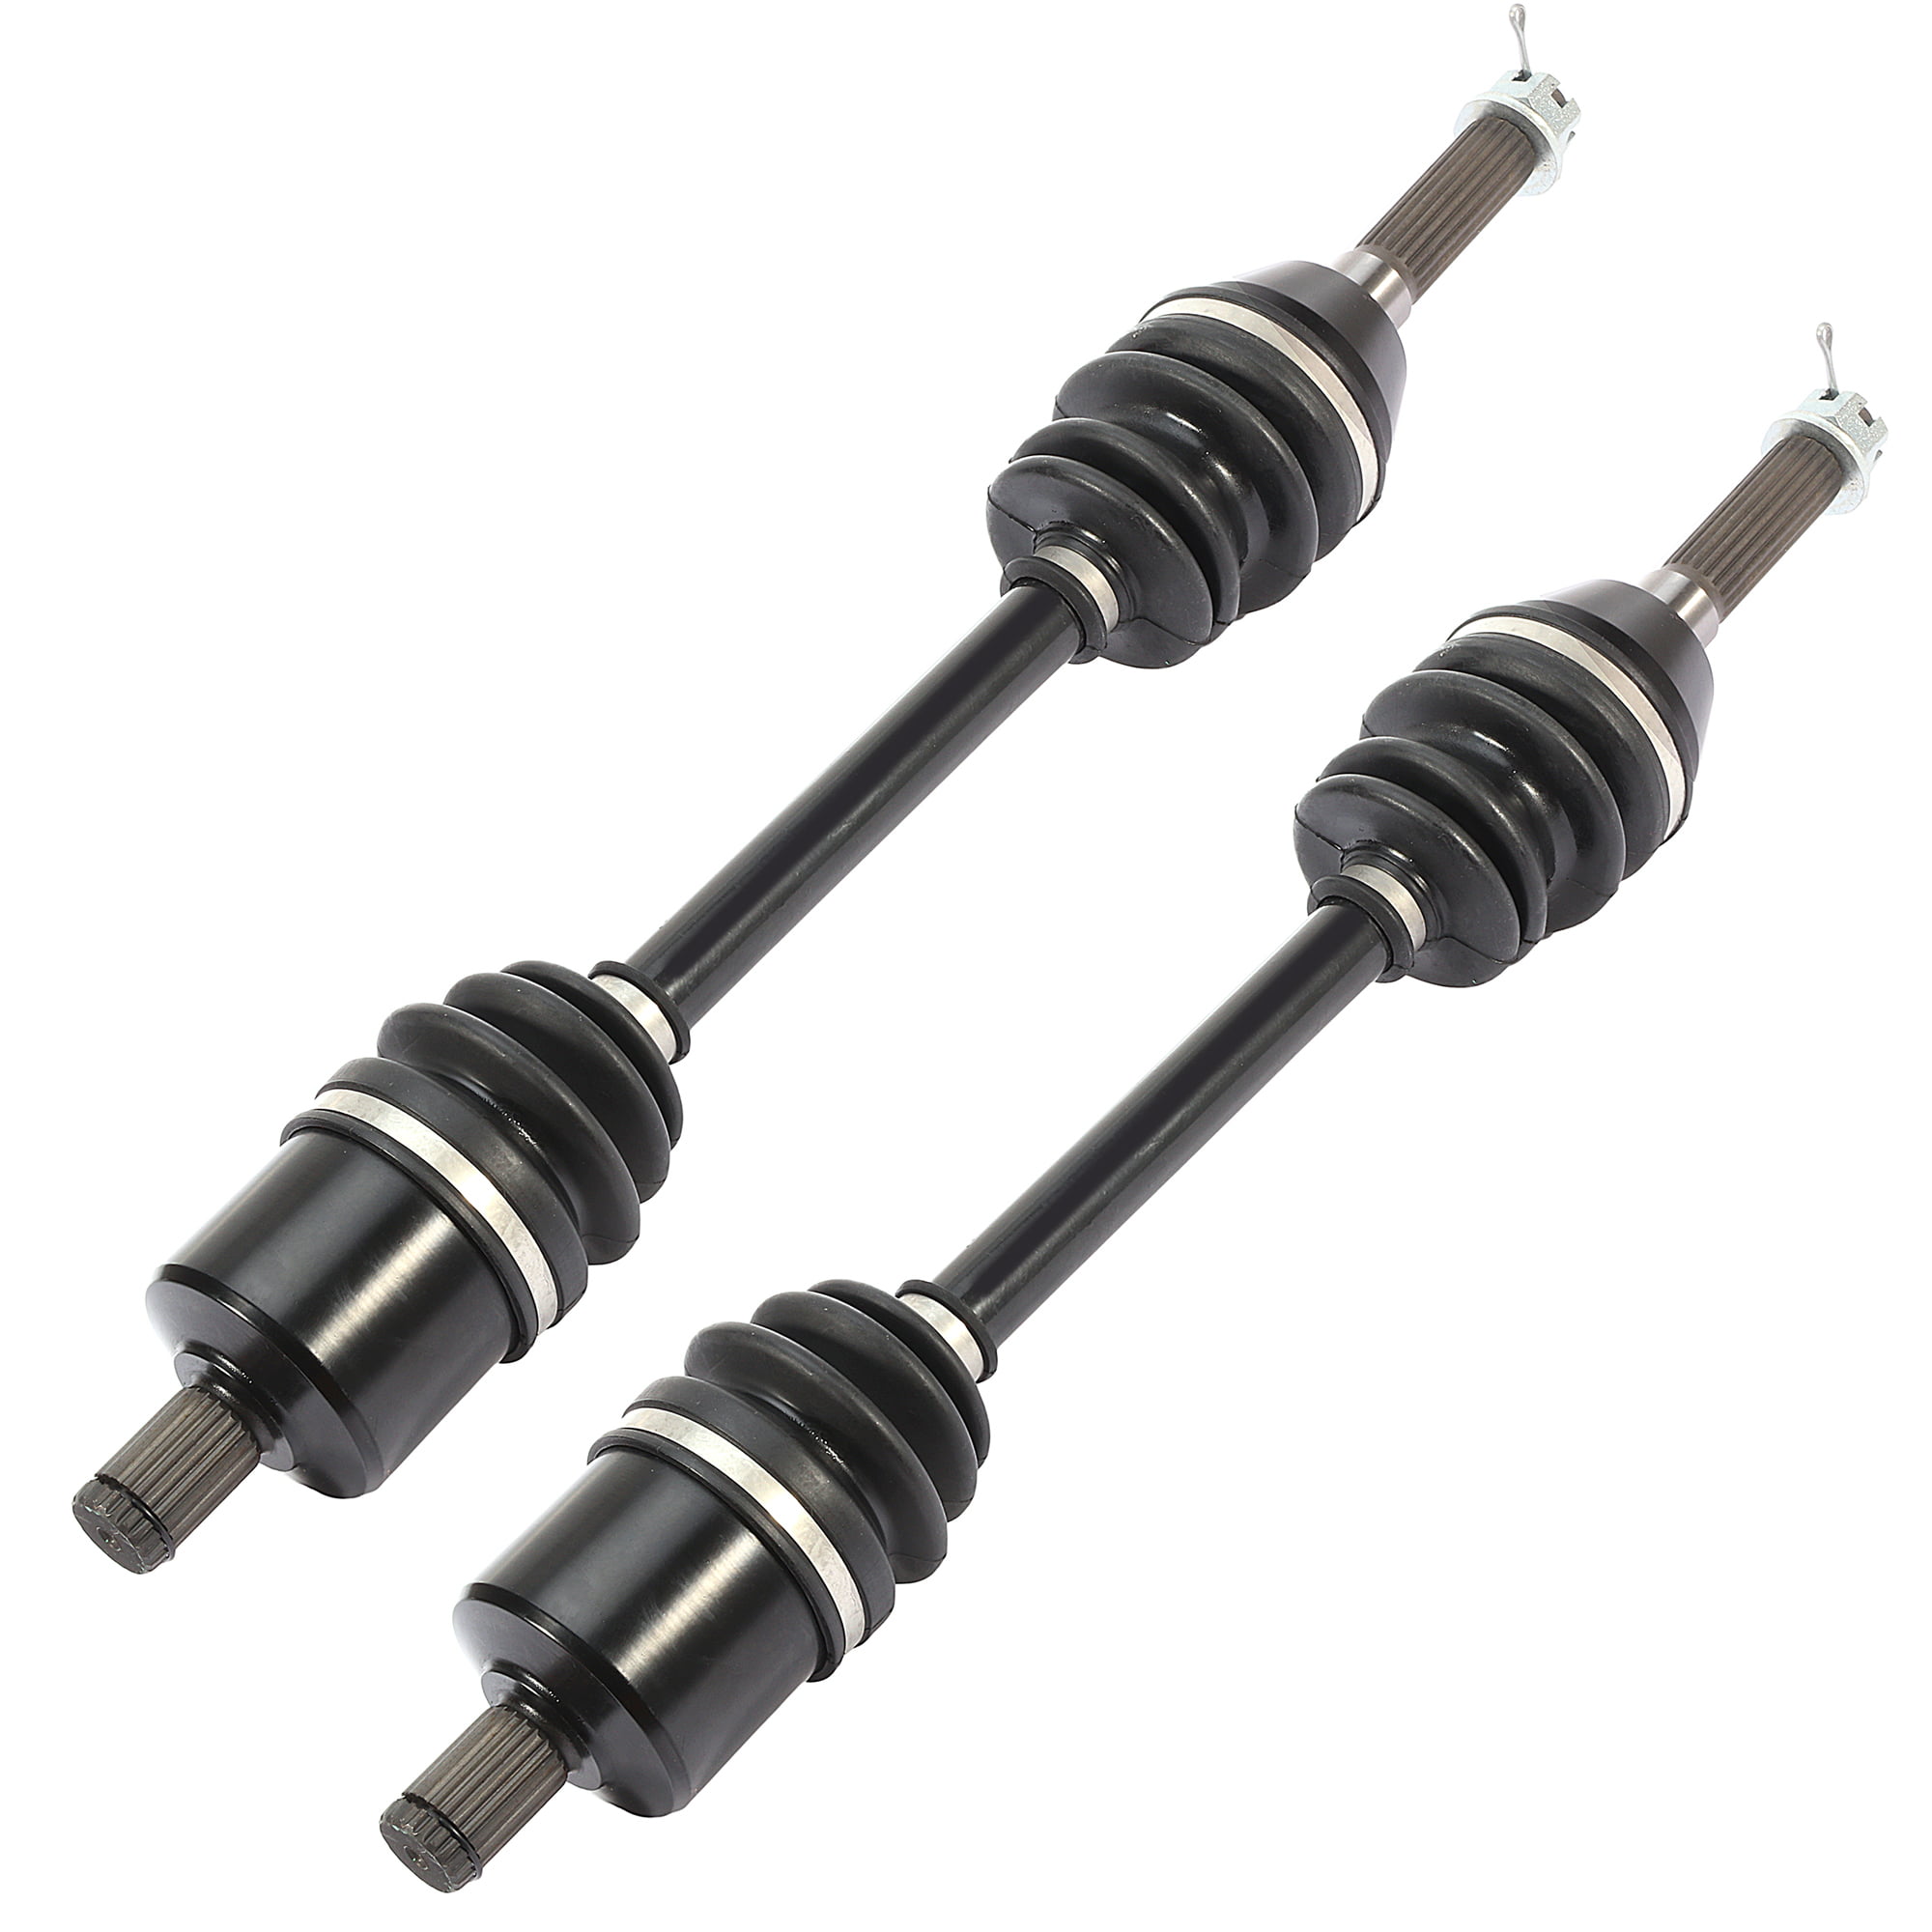 SCITOO CV Axle Shaft Assembly fits for 2007 2014 Front Left Right Polaris Sportsman 400 450 500 HO X2 